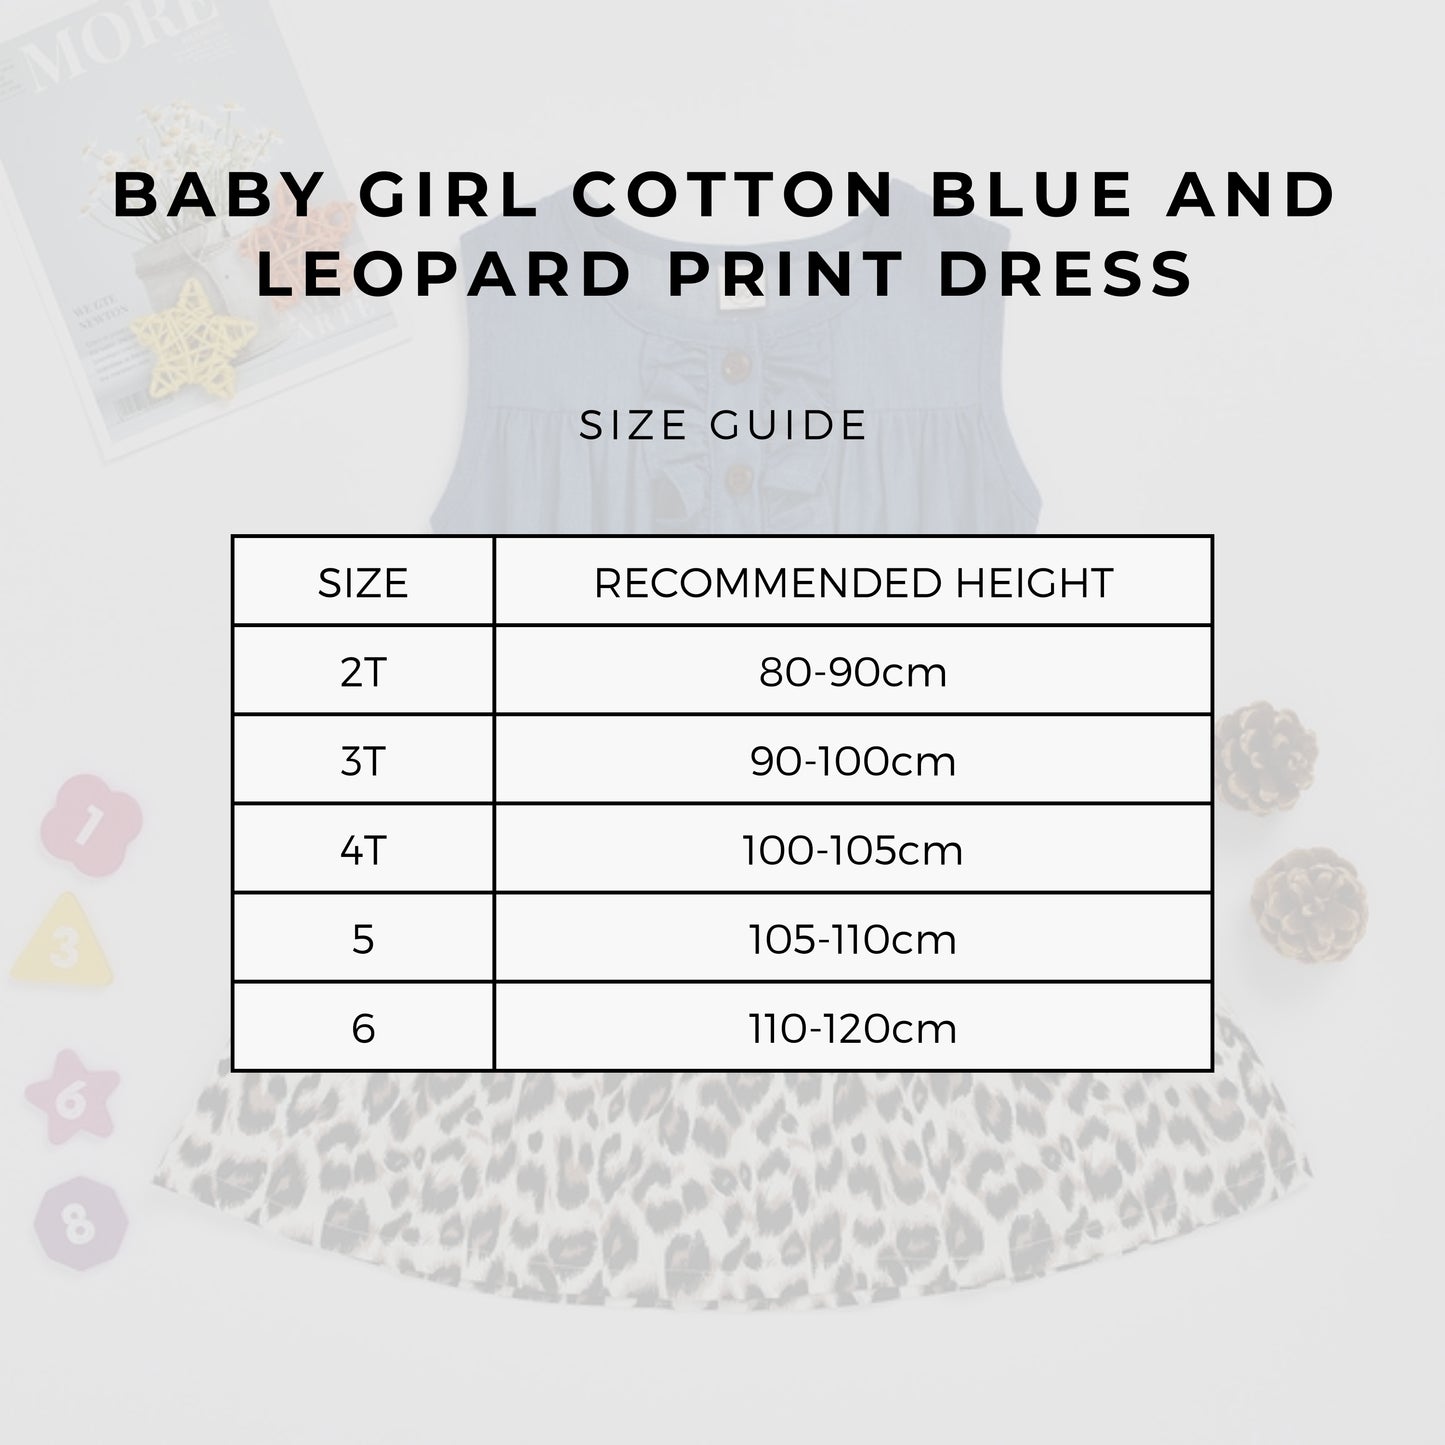 Baby Girl Cotton Blue and Leopard Print Dress SIZE